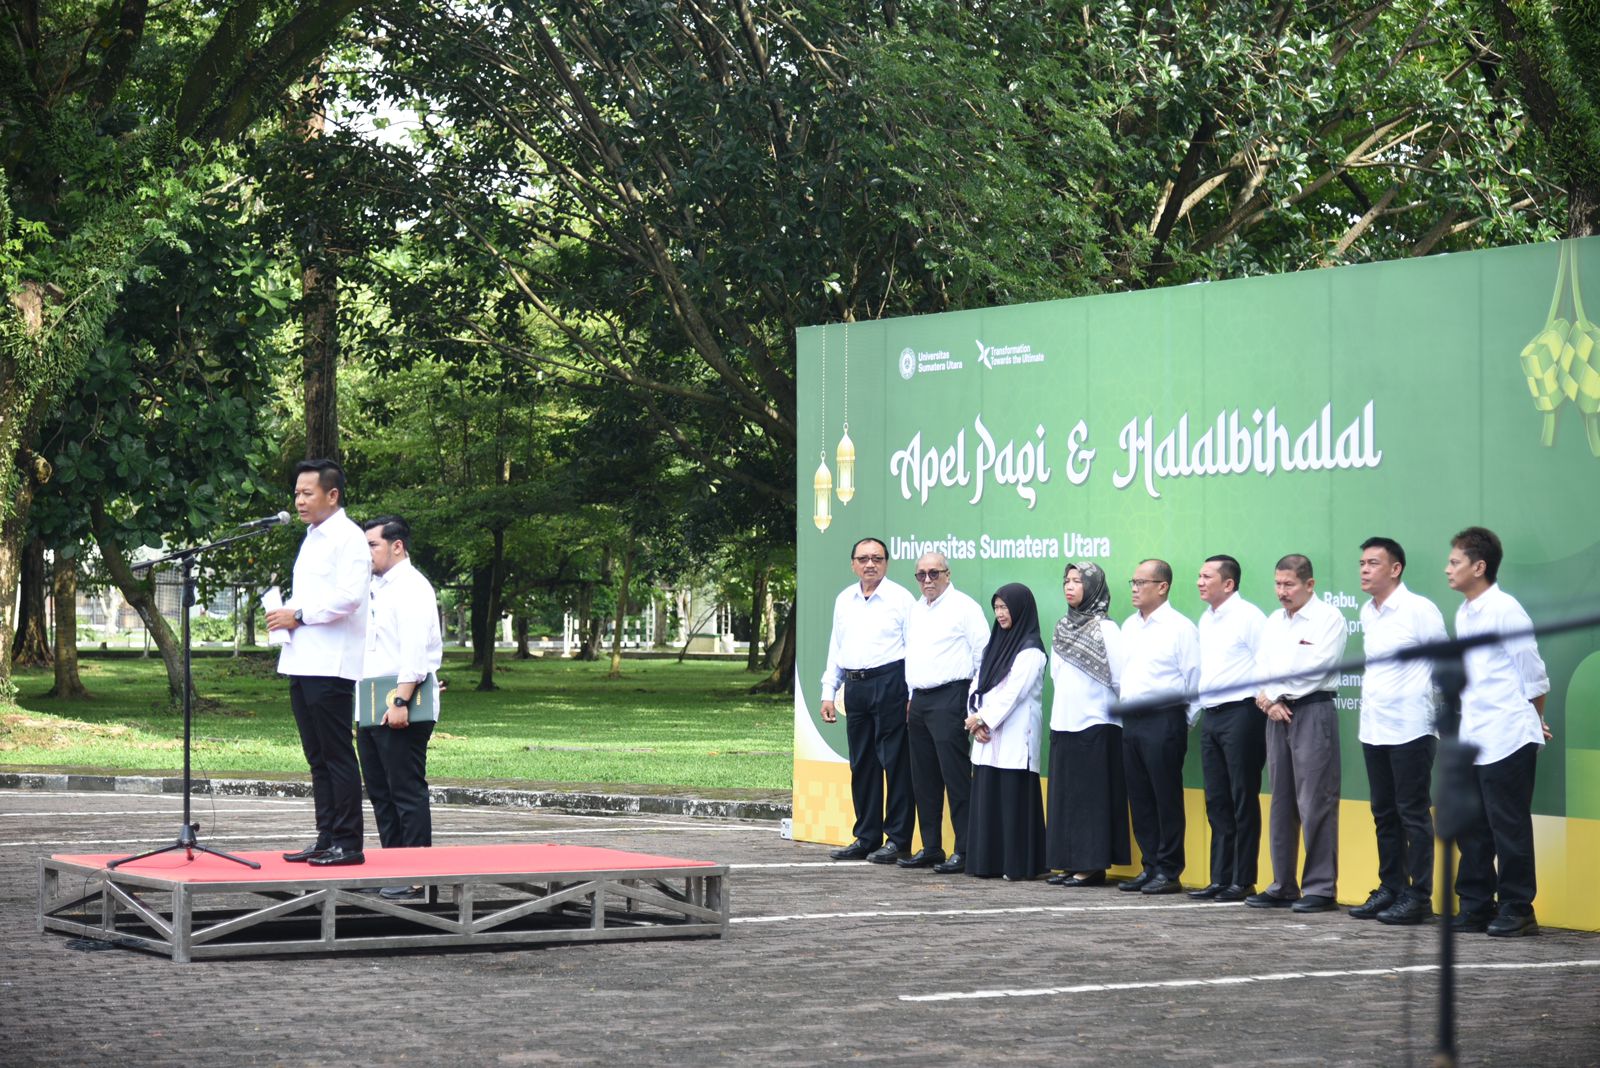 The USU Rector Leads a Combined Assembly After Eid al-Fitr